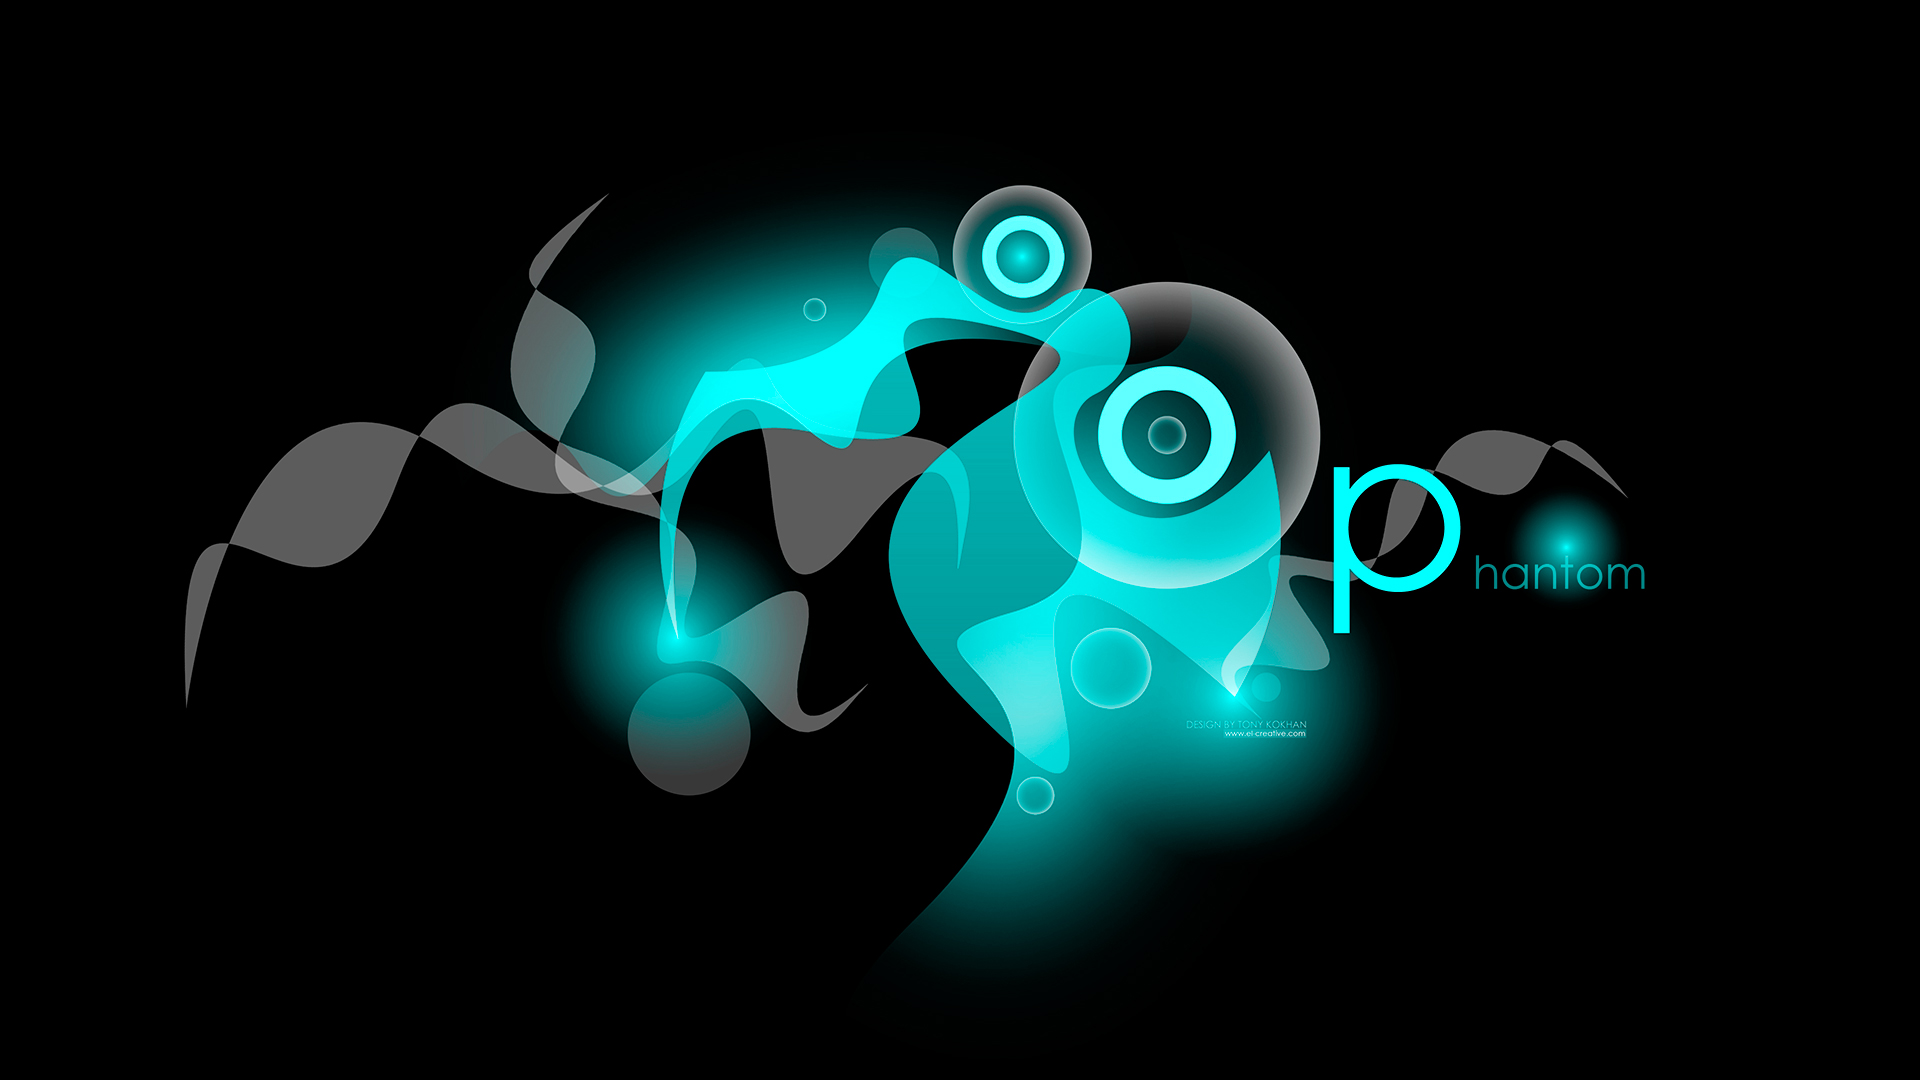 Phantom Abstract Turquoise HD Wallpaper Design By Tony Kokhan